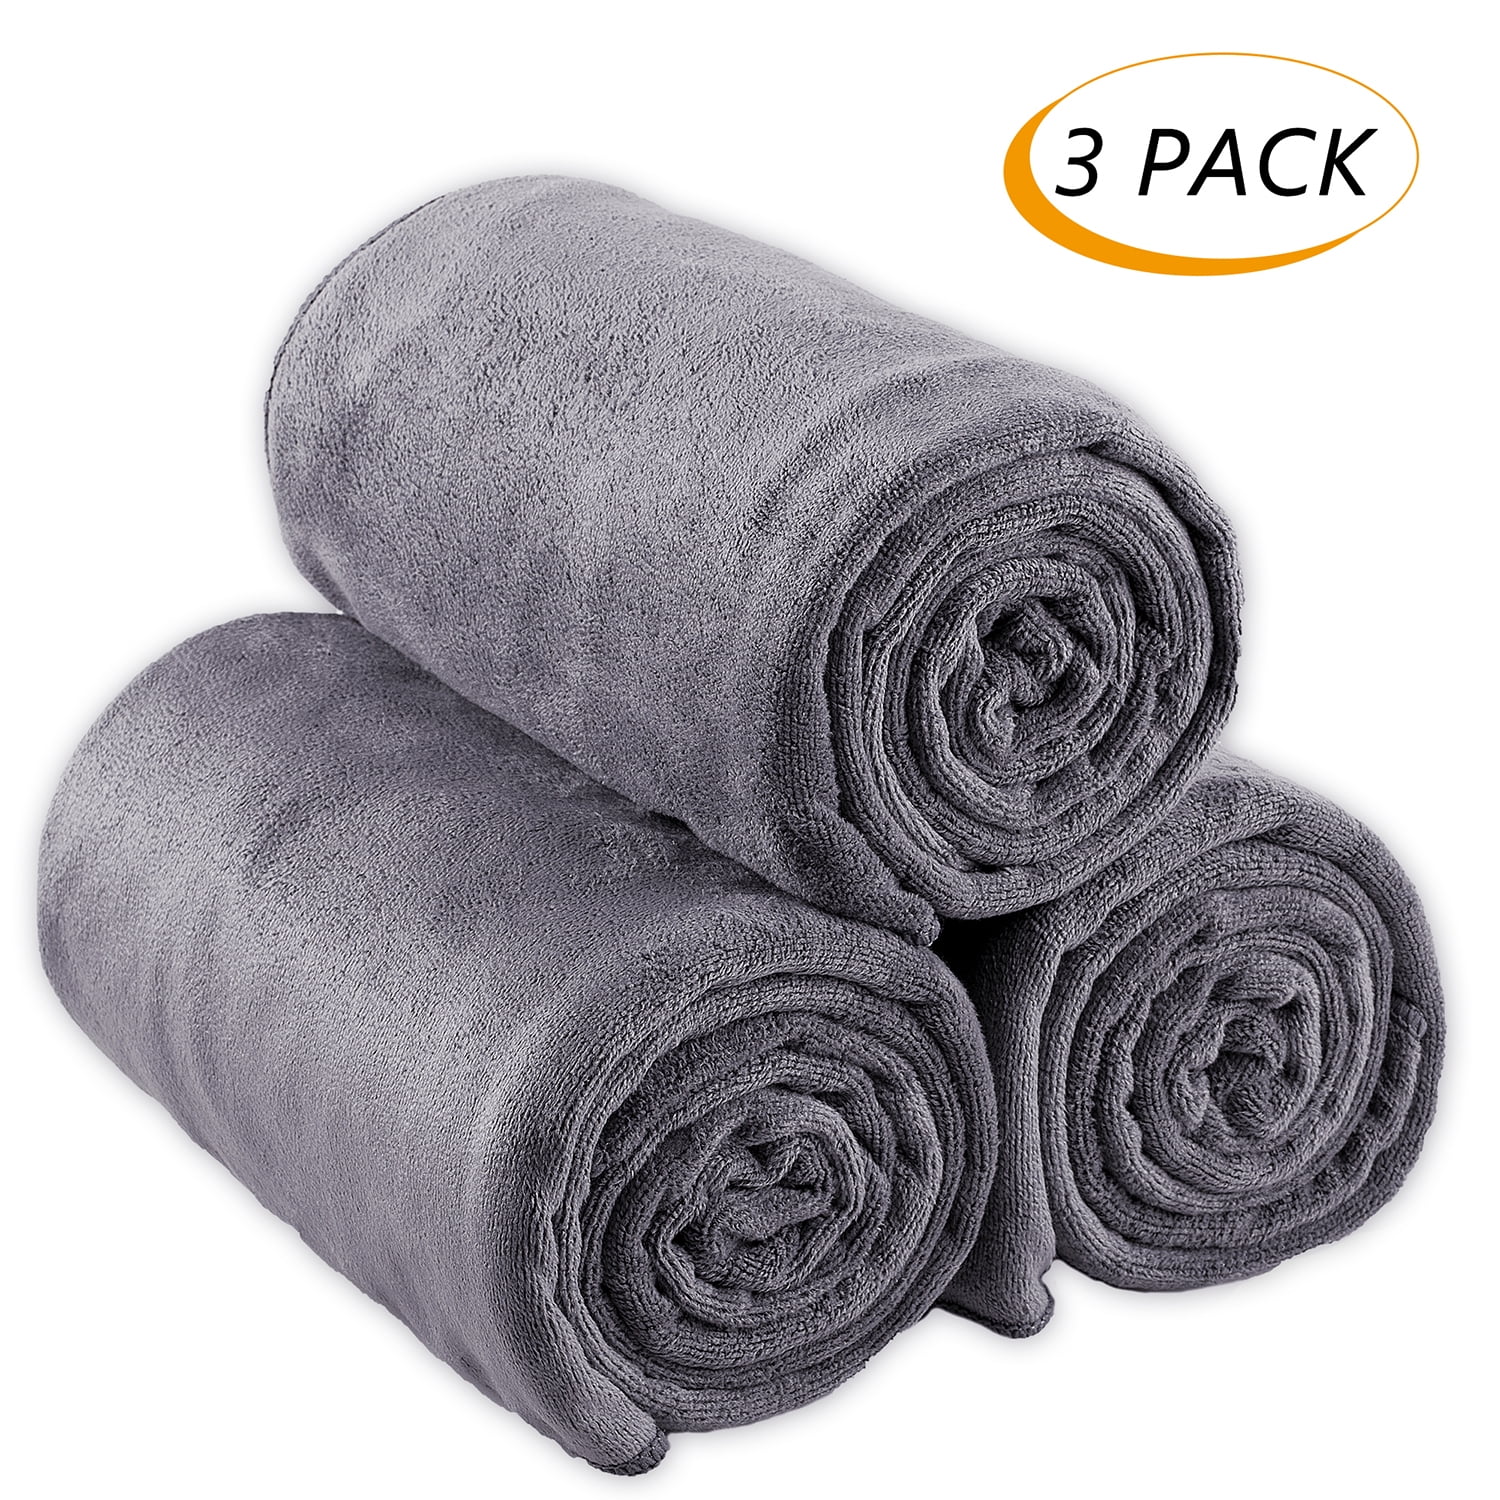 3 Pack Bath Towels Extra-Absorbent 27" x 55" 